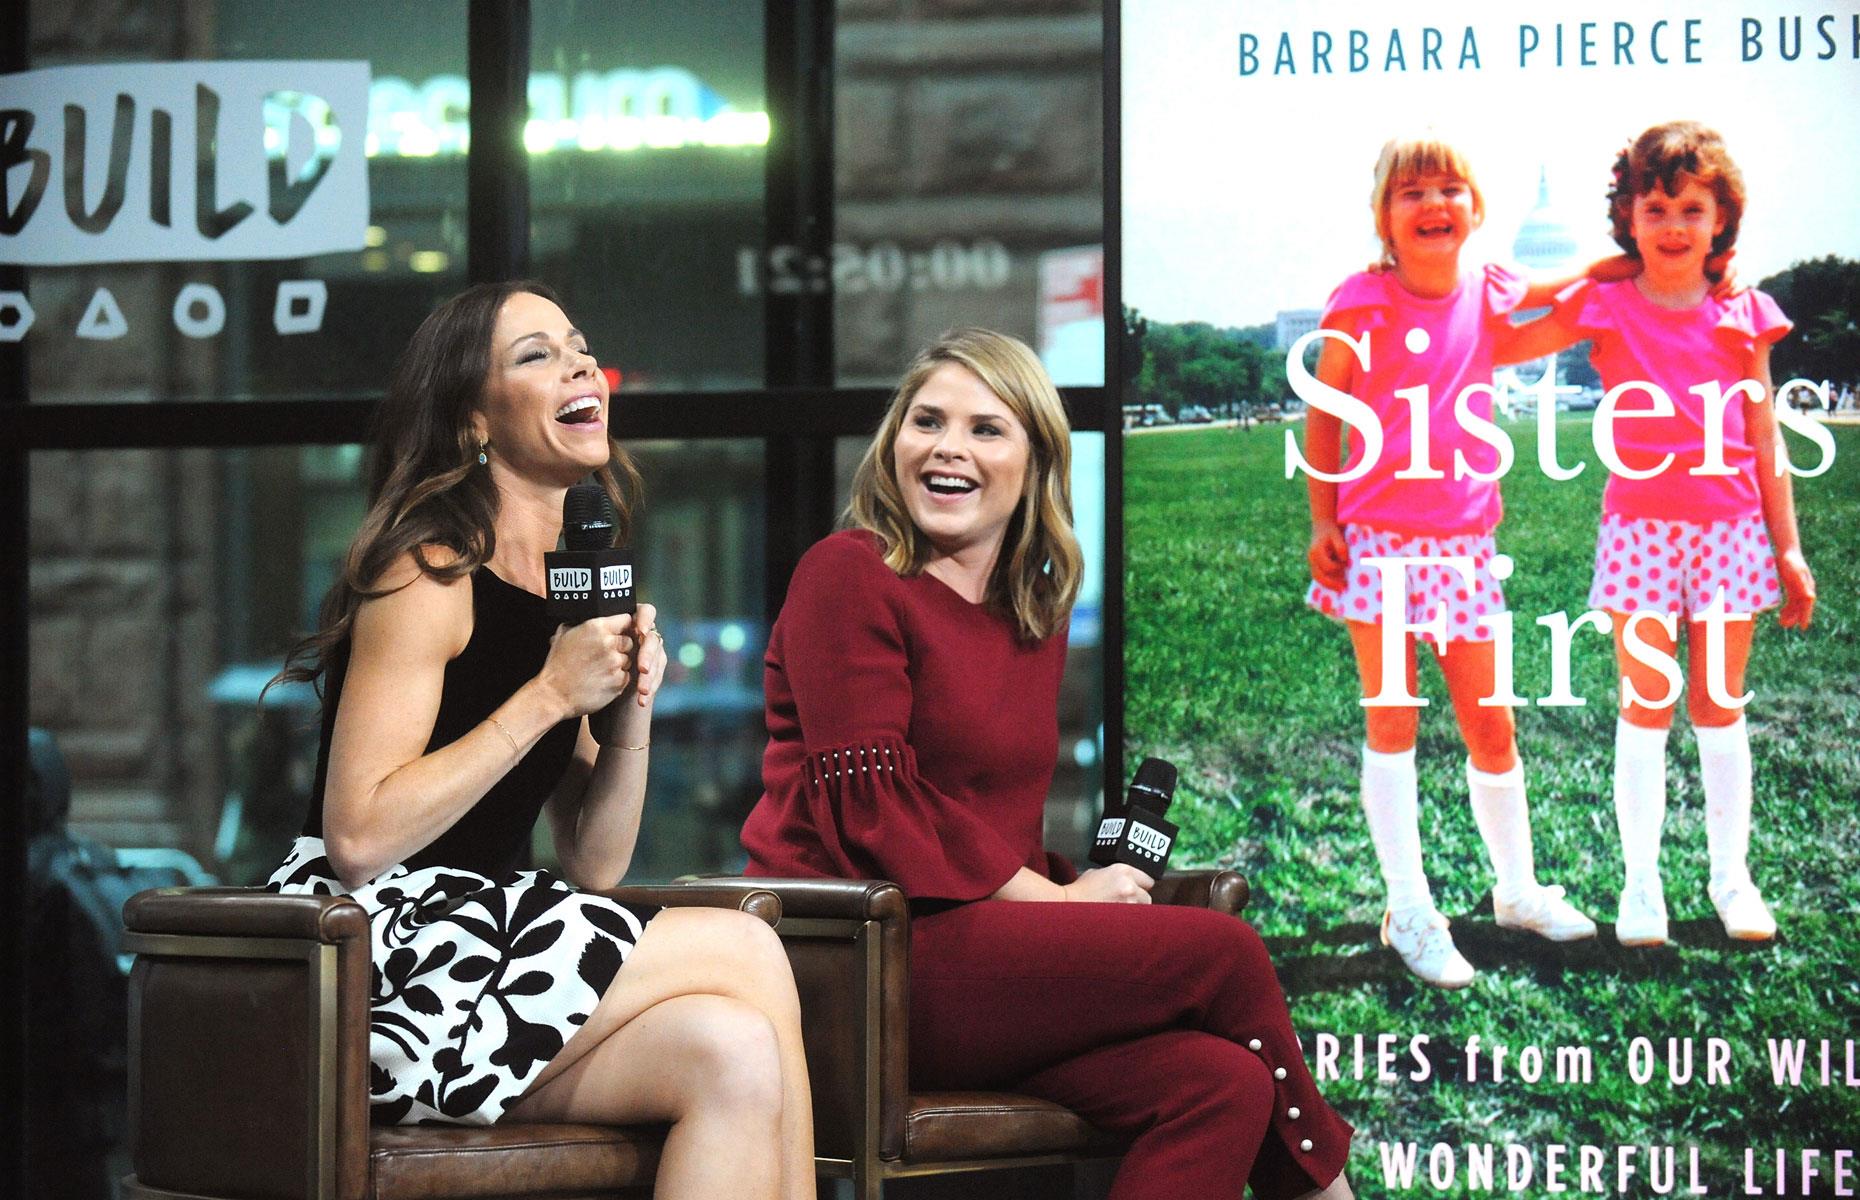 <p>Like their fashionista cousin Lauren, the twin daughters of George W Bush and his wife Laura have also pursued careers that can indulge their passions.</p>  <p>The elder twin by a mere 60 seconds, Barbara Pierce Bush has centered her work around healthcare activism and philanthropy.</p>